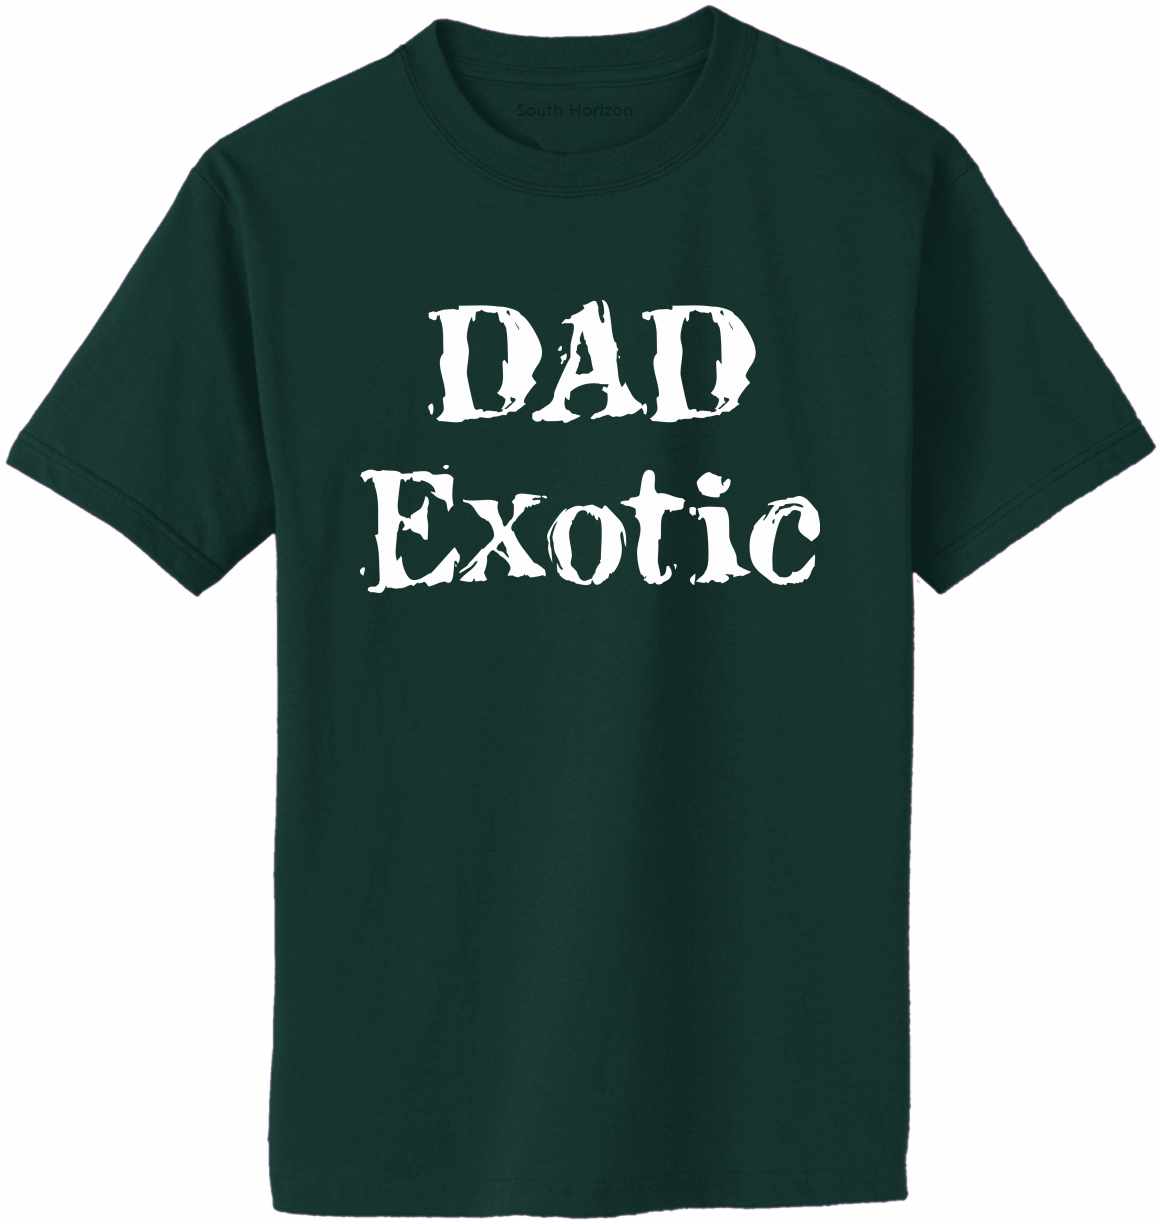 DAD EXOTIC funny Fathers Day Birthday Shirt Adult T-Shirt